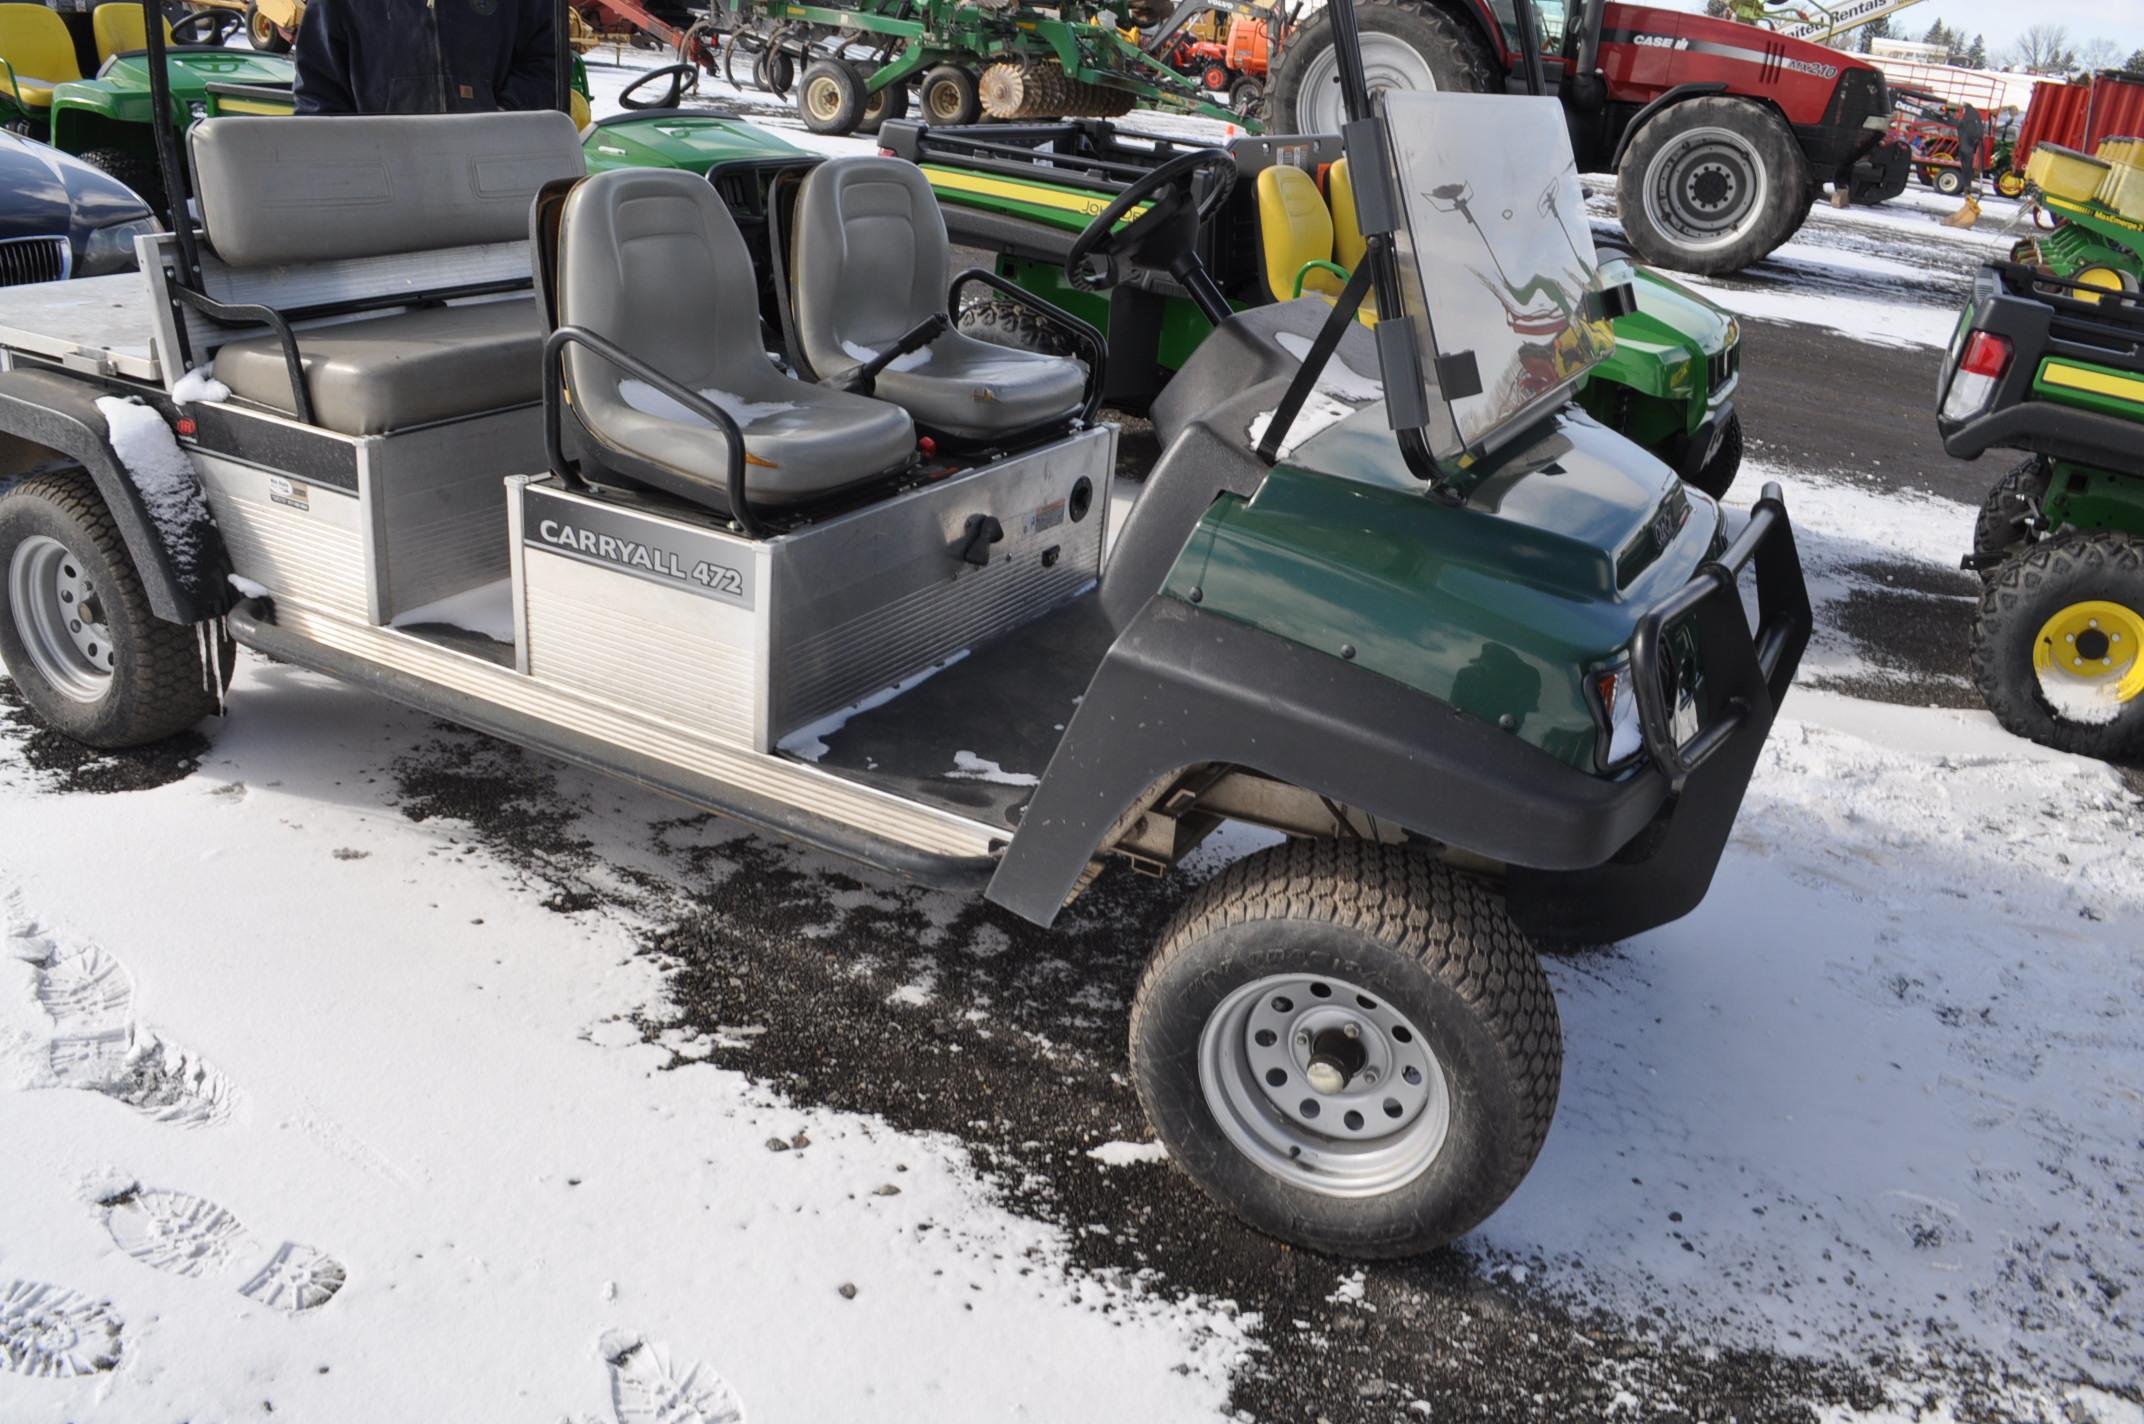 Clubcar 472 carry-all w/ 3103hrs, gas, dif lock, 4 seater